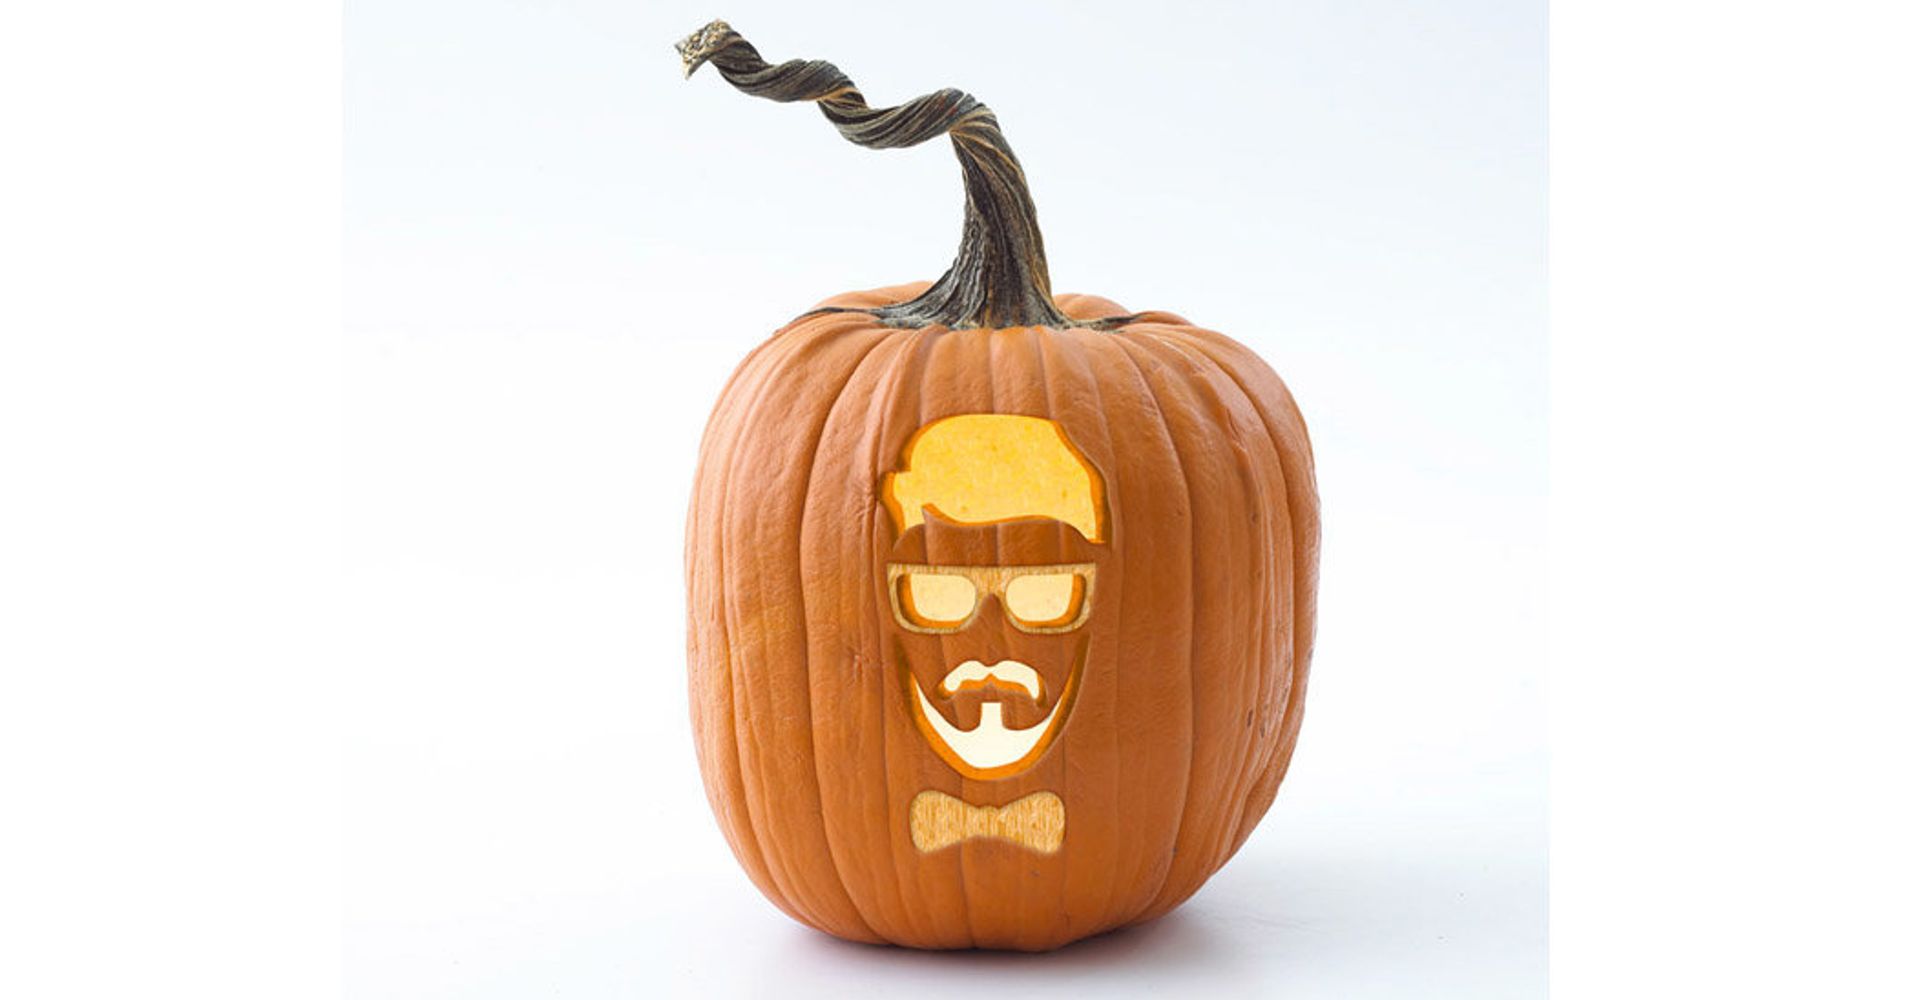 The Free Pumpkin Carving Stencils You Need To Try This Year | HuffPost